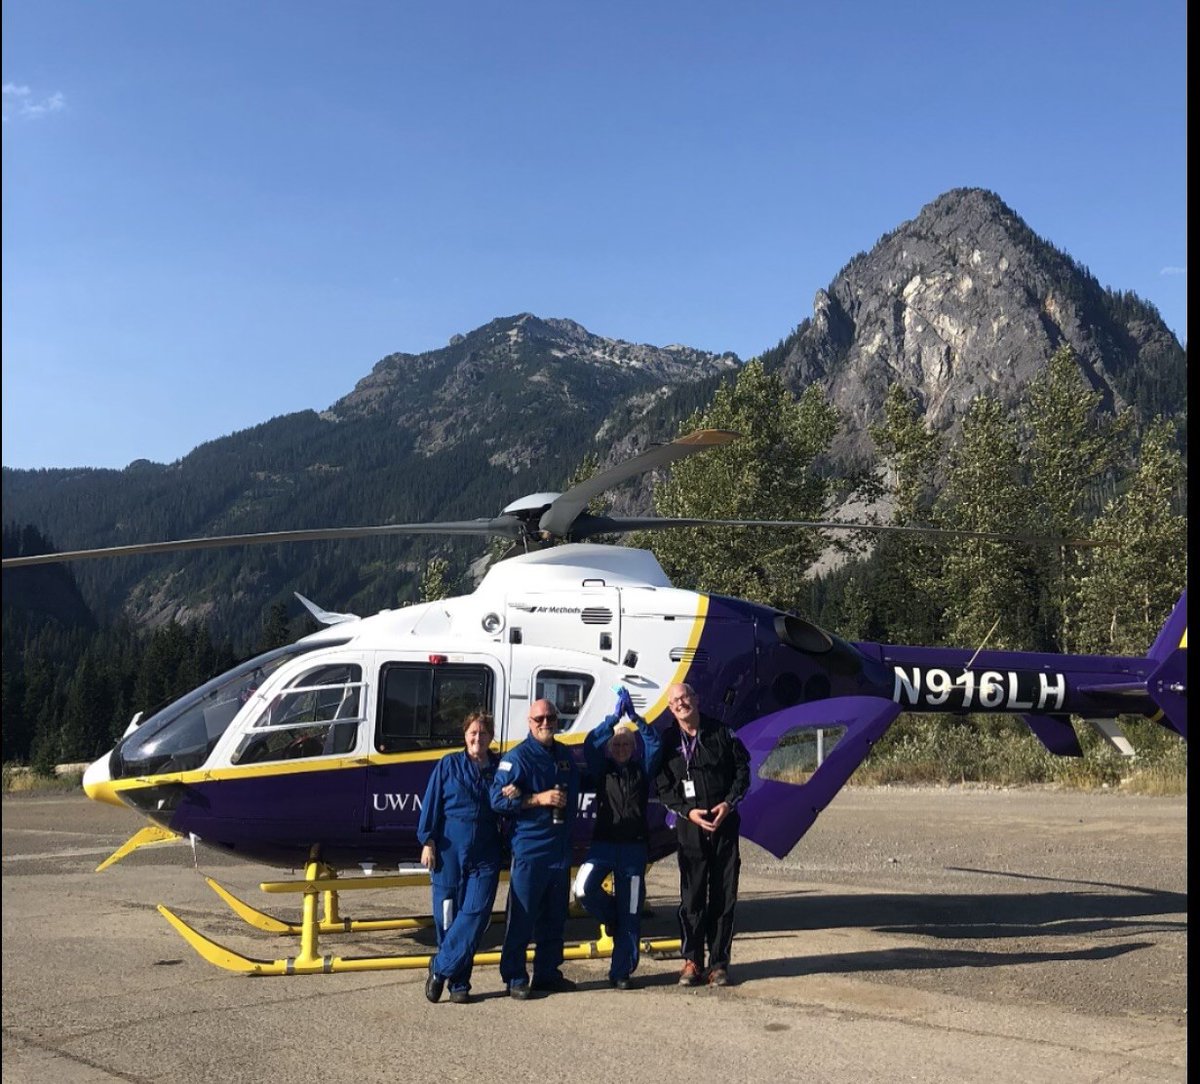 TBT. Airlift 6 in the Summit at Snoqualmie ski area last summer. Photo credit Flight Nurse Barb Dempsey. #Savinglivestogether #airliftnw